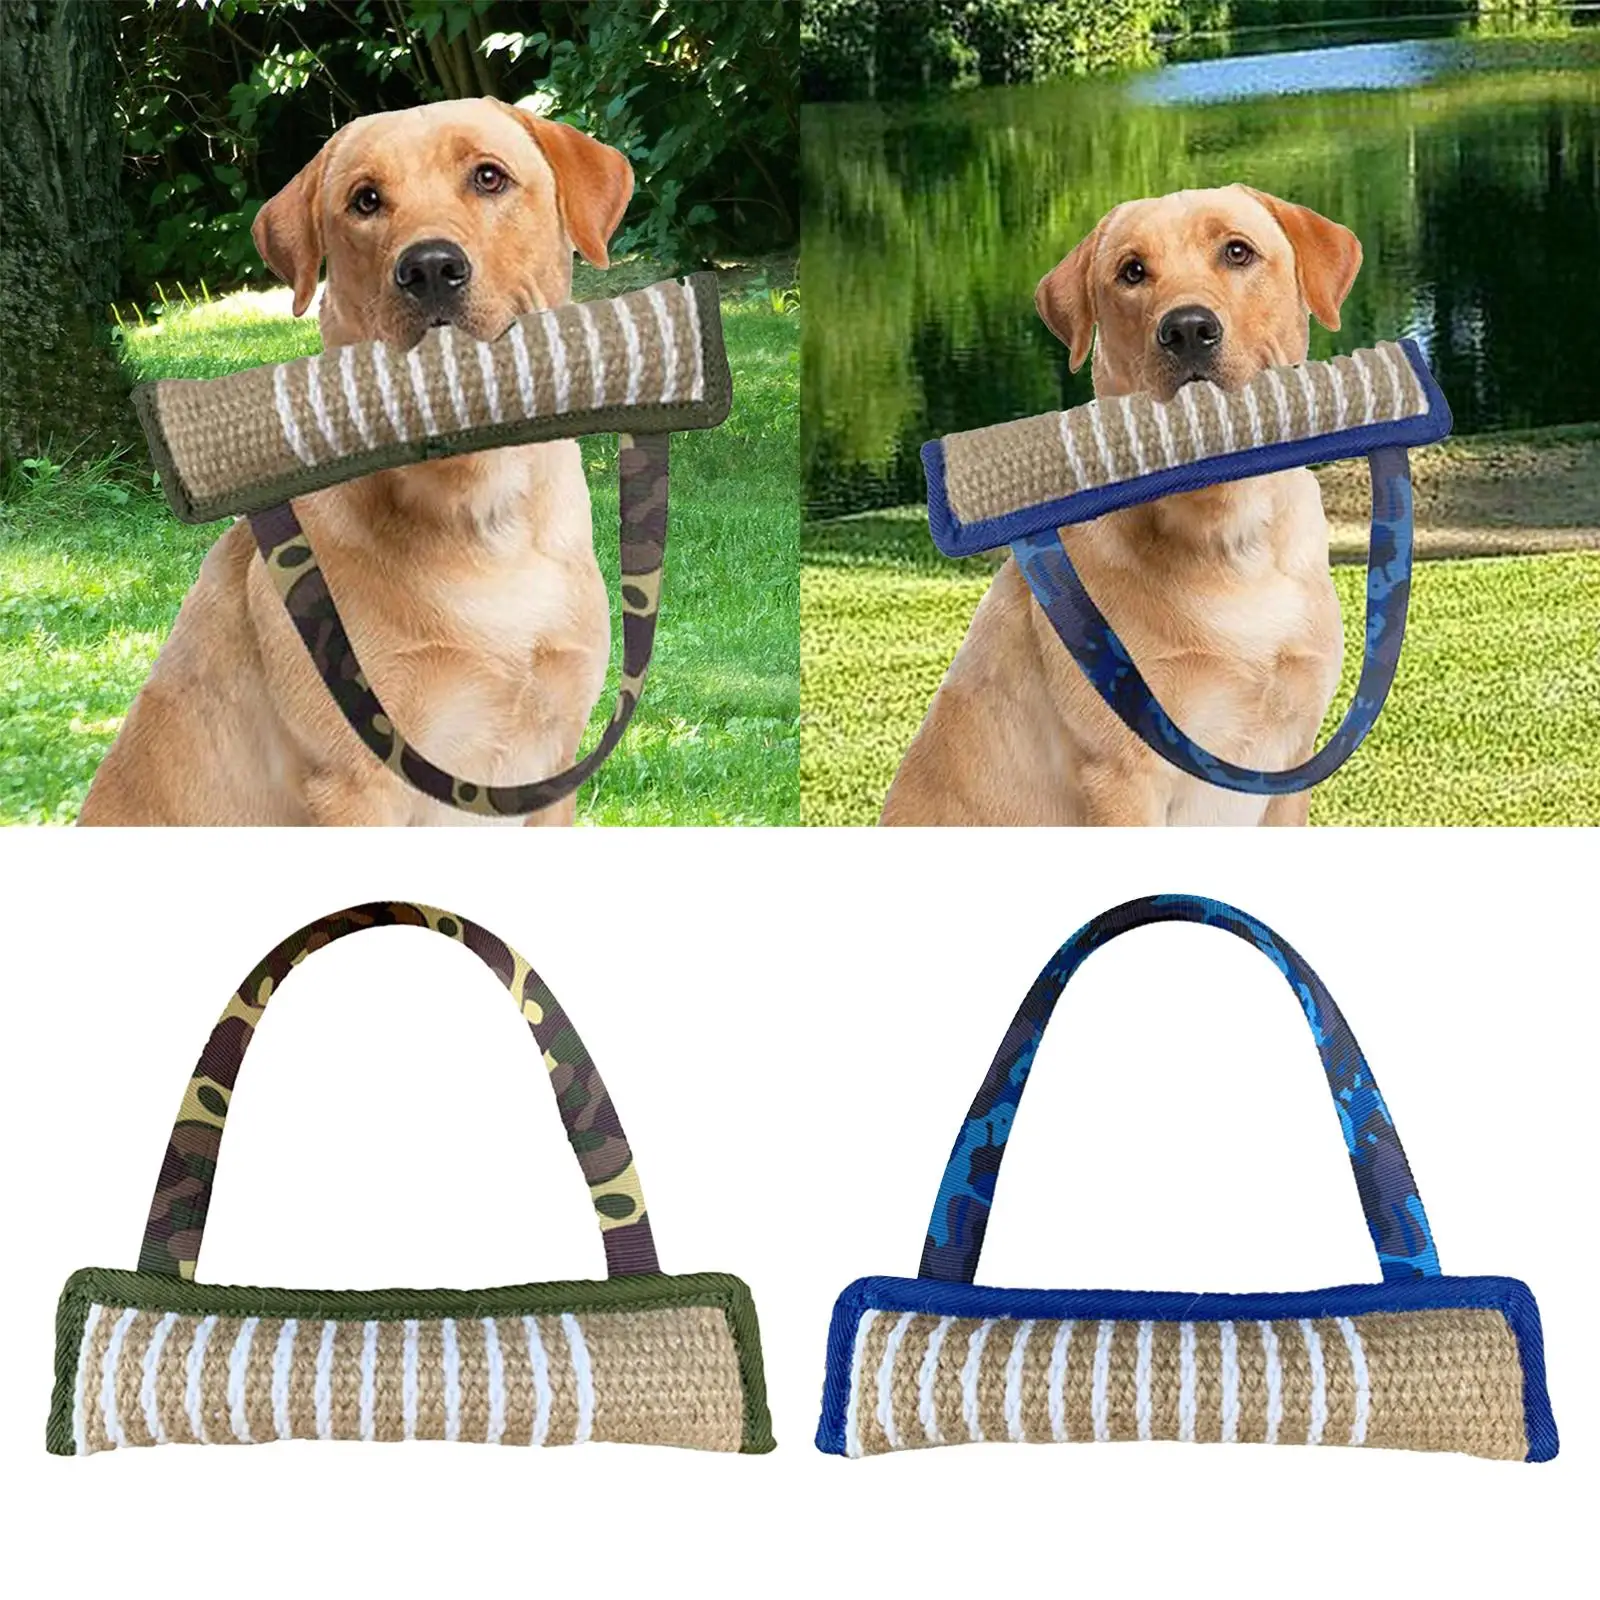 Dog Tug Toy Pet Supplies Puppy Training Interactive Play for Outdoor Playing